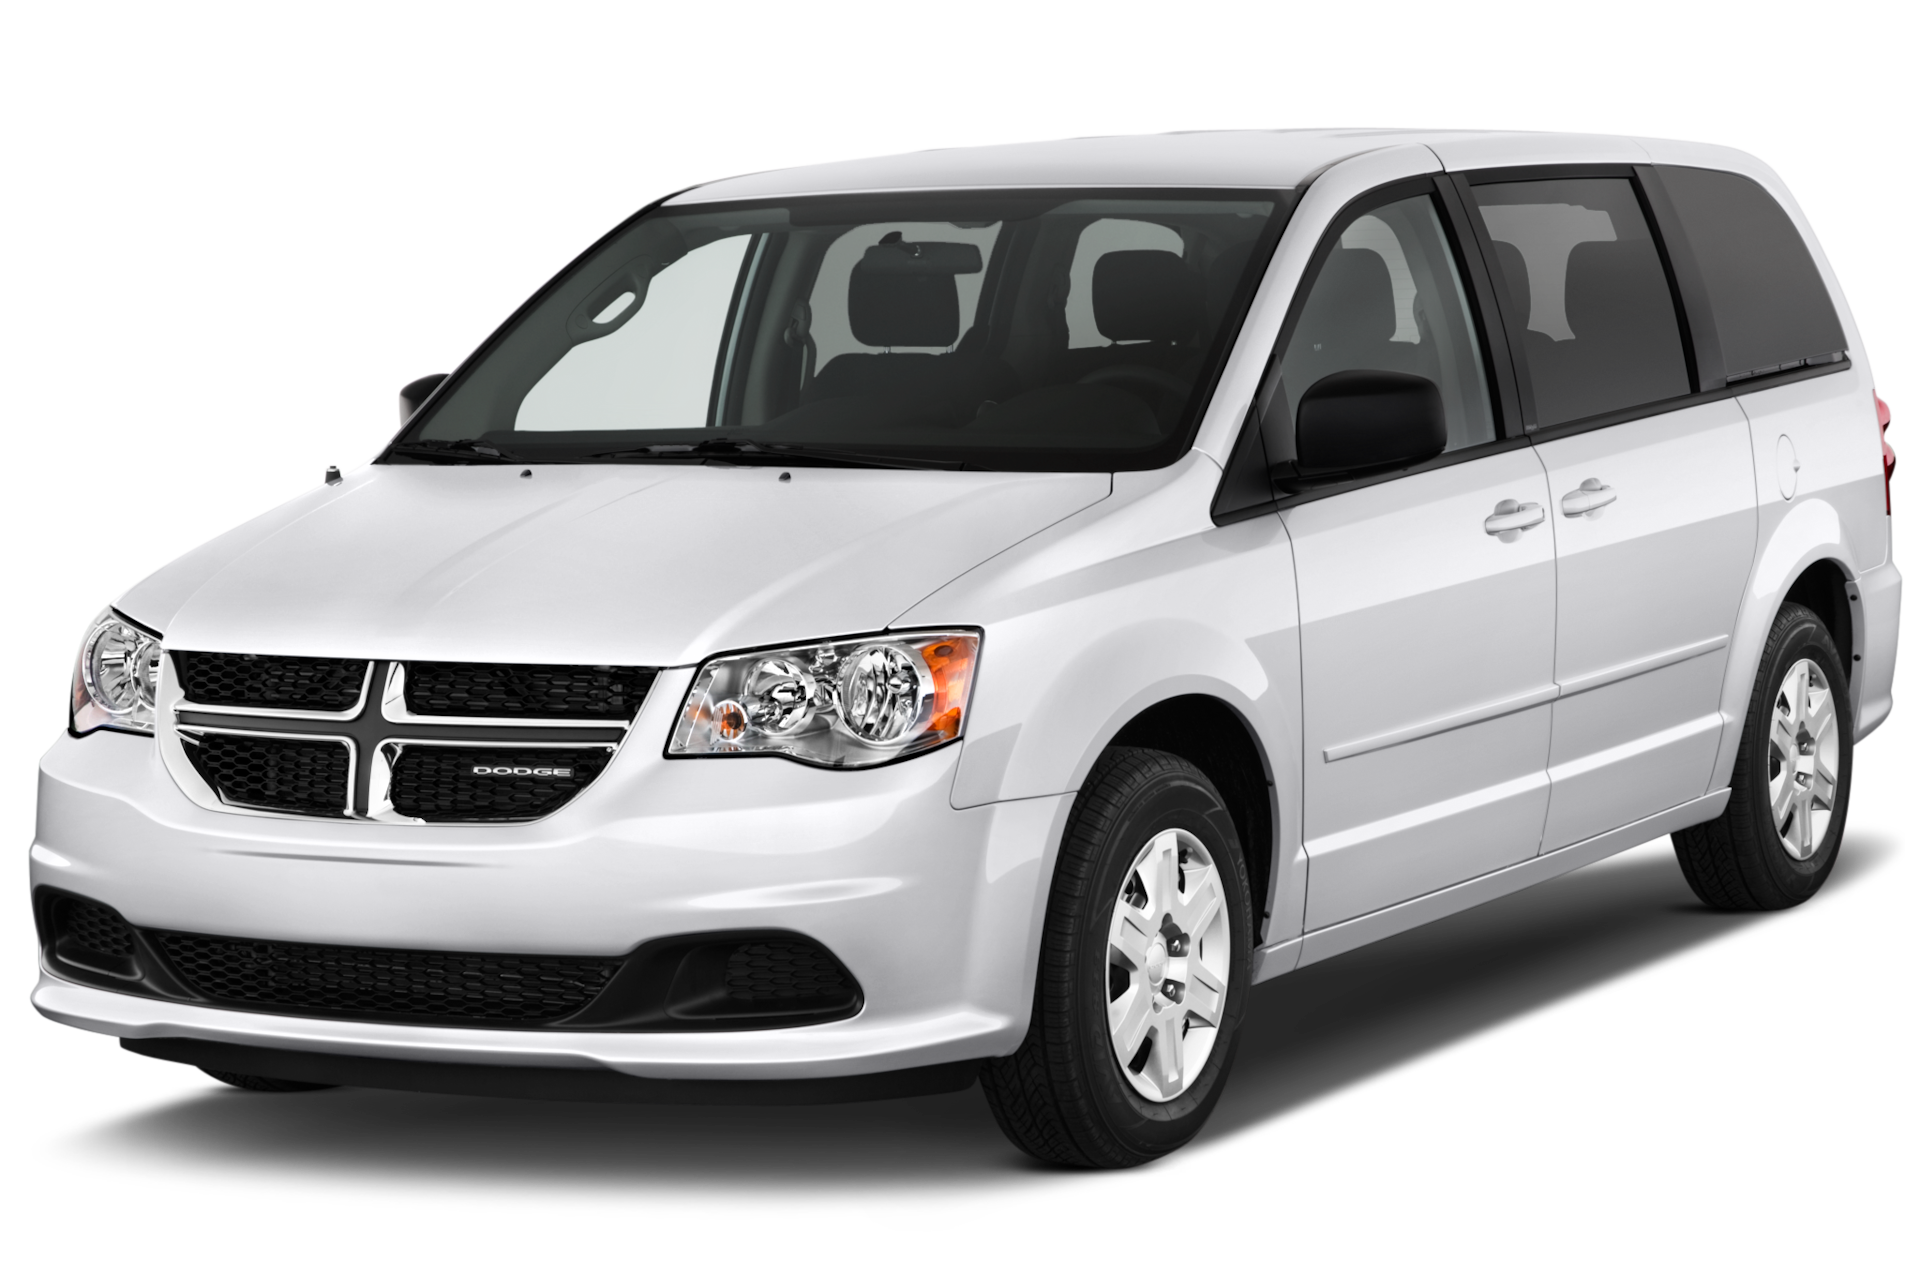 2014 Dodge Grand Caravan Prices, Reviews, and Photos - MotorTrend